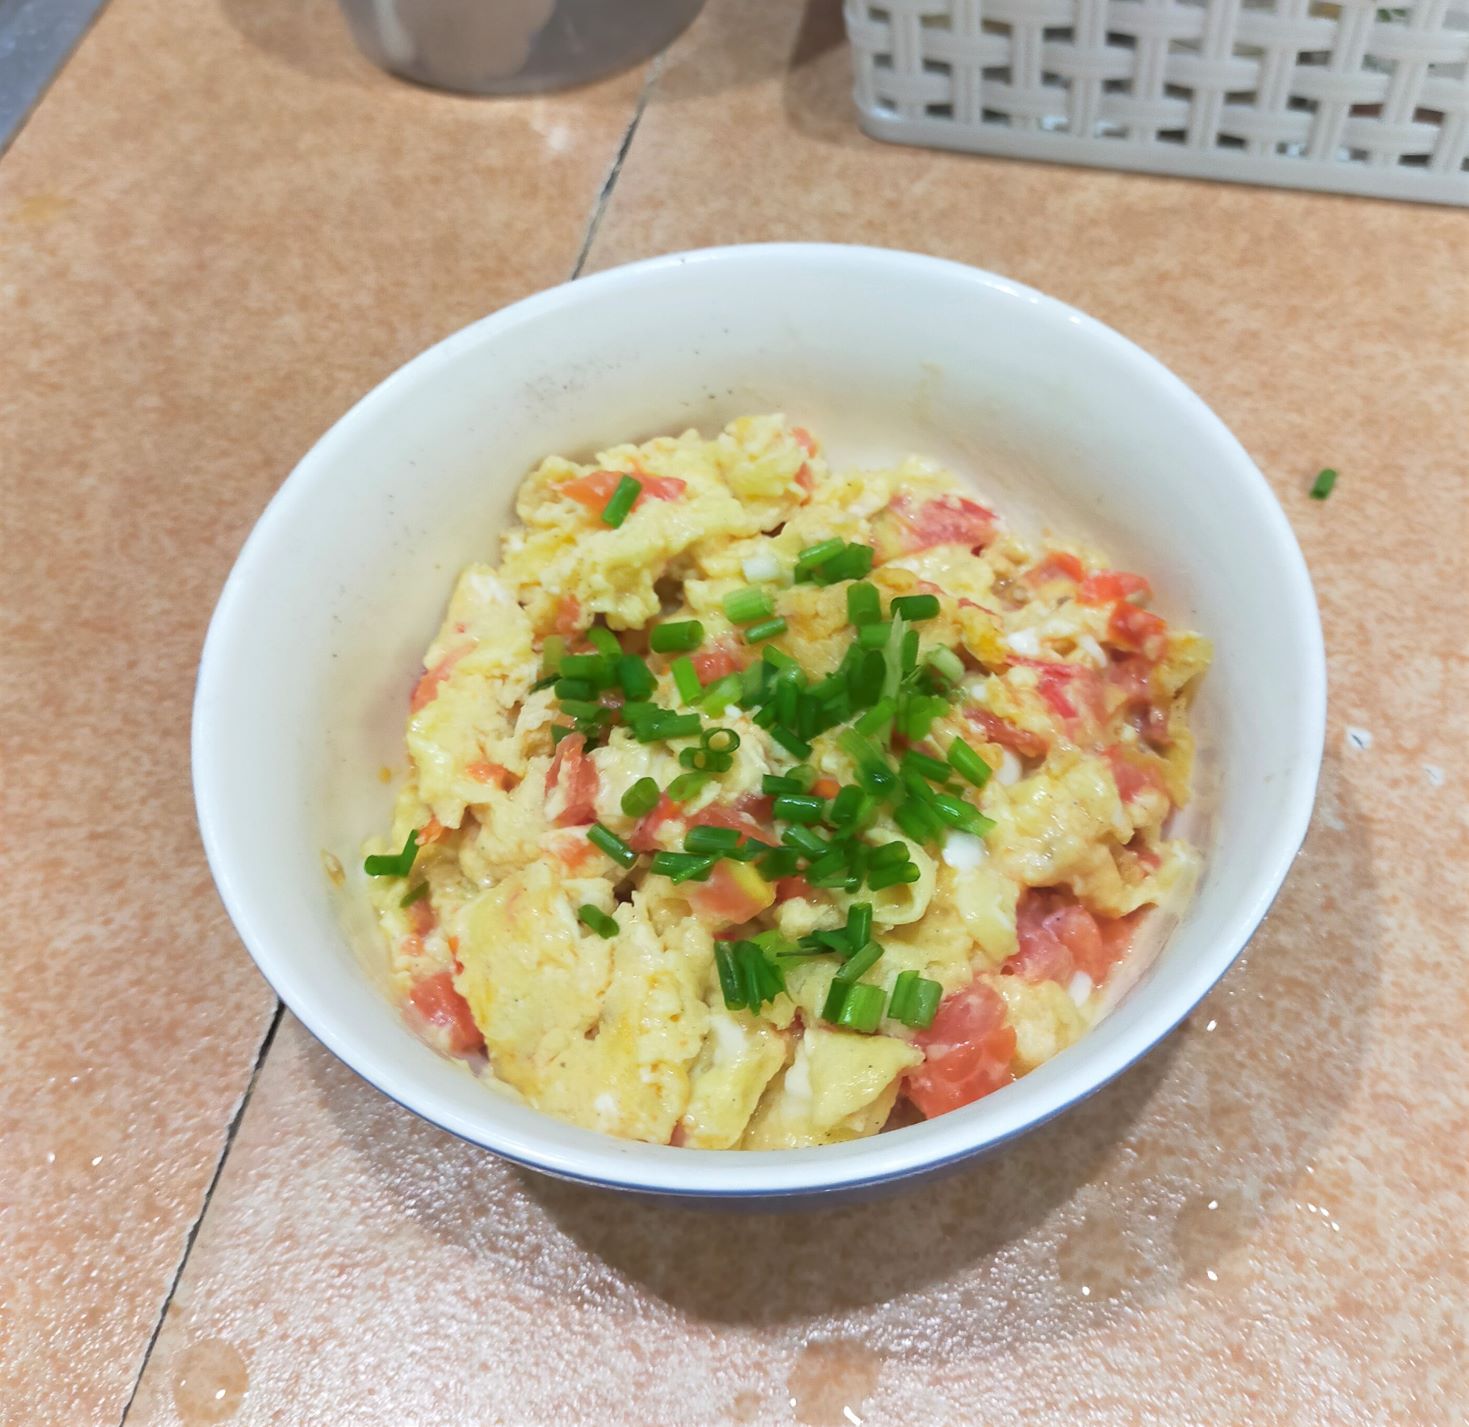 https://d2yqtzq6enitlu.cloudfront.net/wp-content/uploads/2023/03/cooked-egg-tomato.jpg